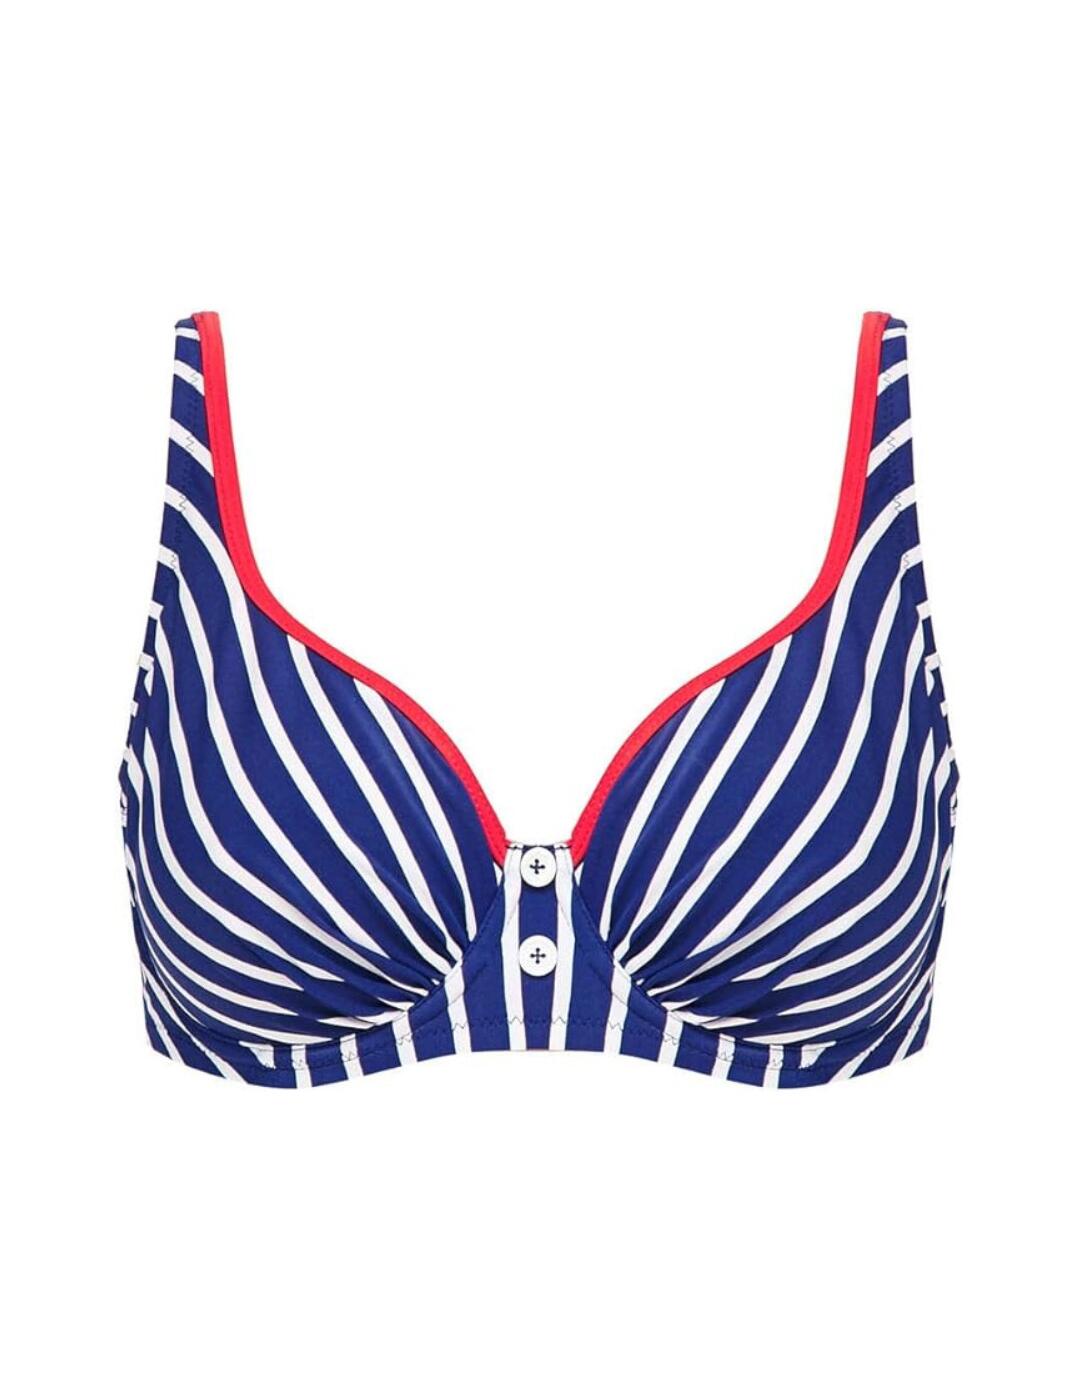 Pour Moi Starboard Underwired Bikini Top Navy/Red